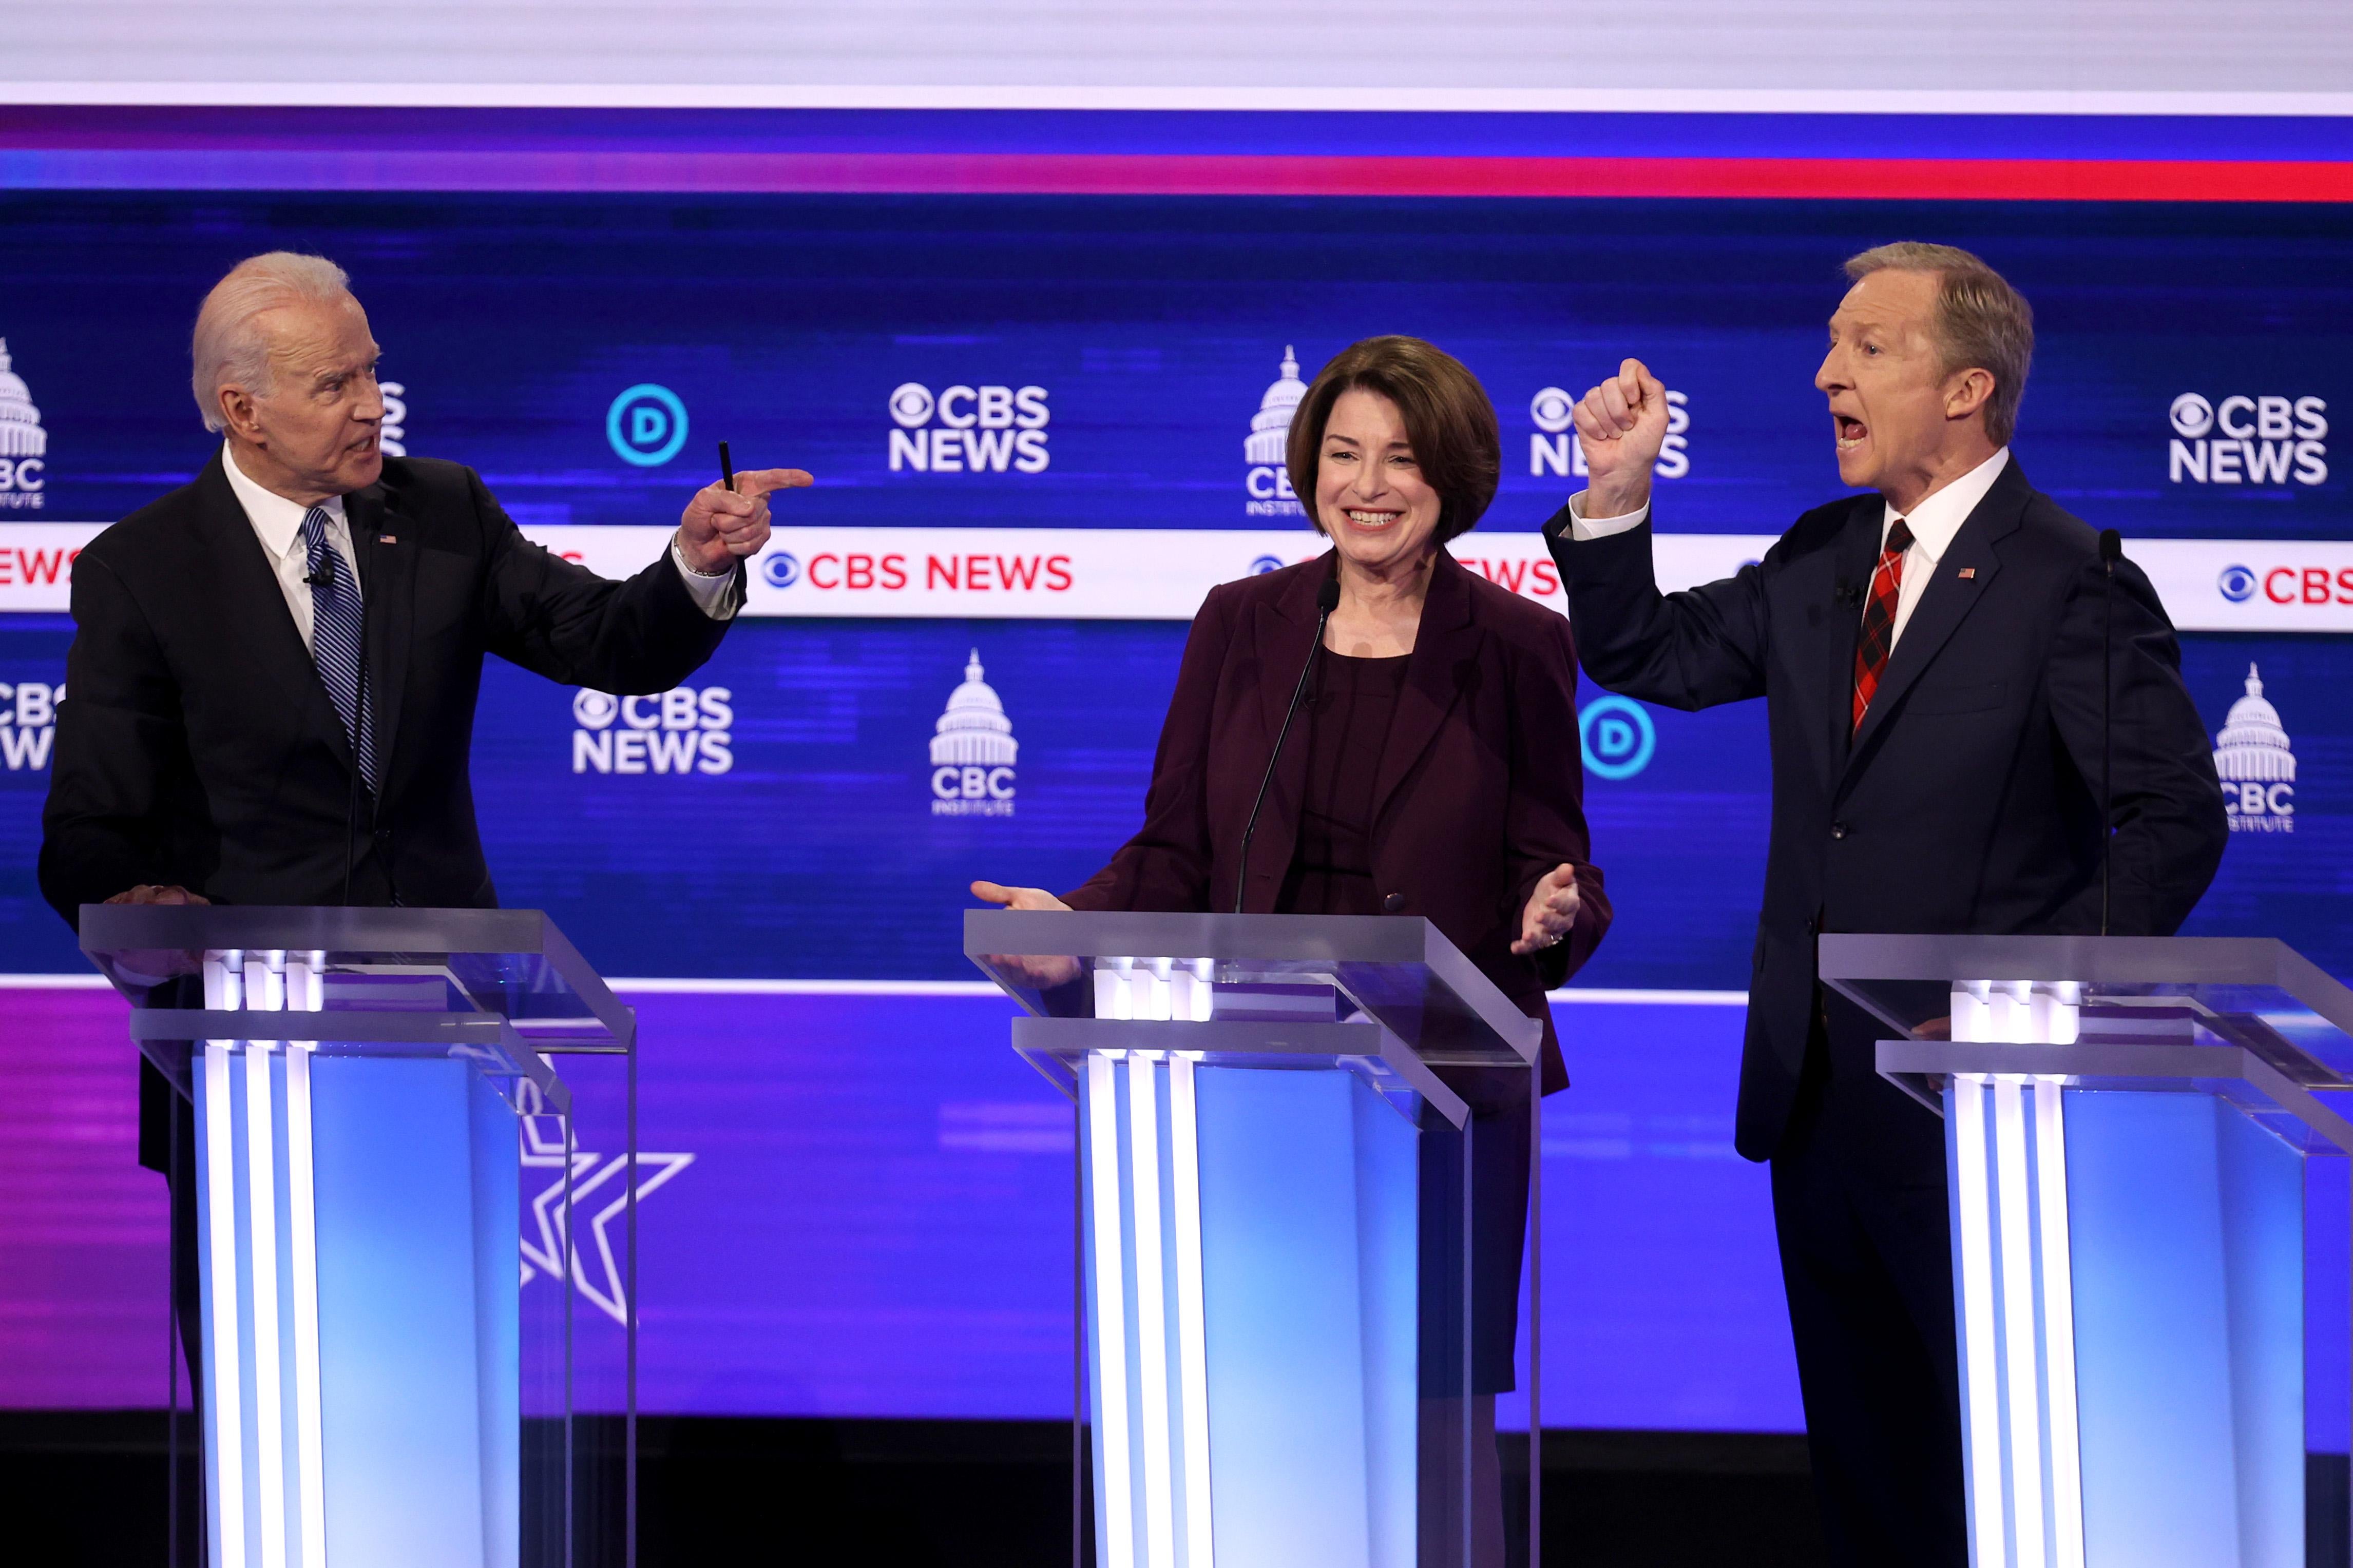 Joe Biden and Tom Steyer point angrily at each other as they speak on the debate stage. Amy Klobuchar, standing between them, smiles.